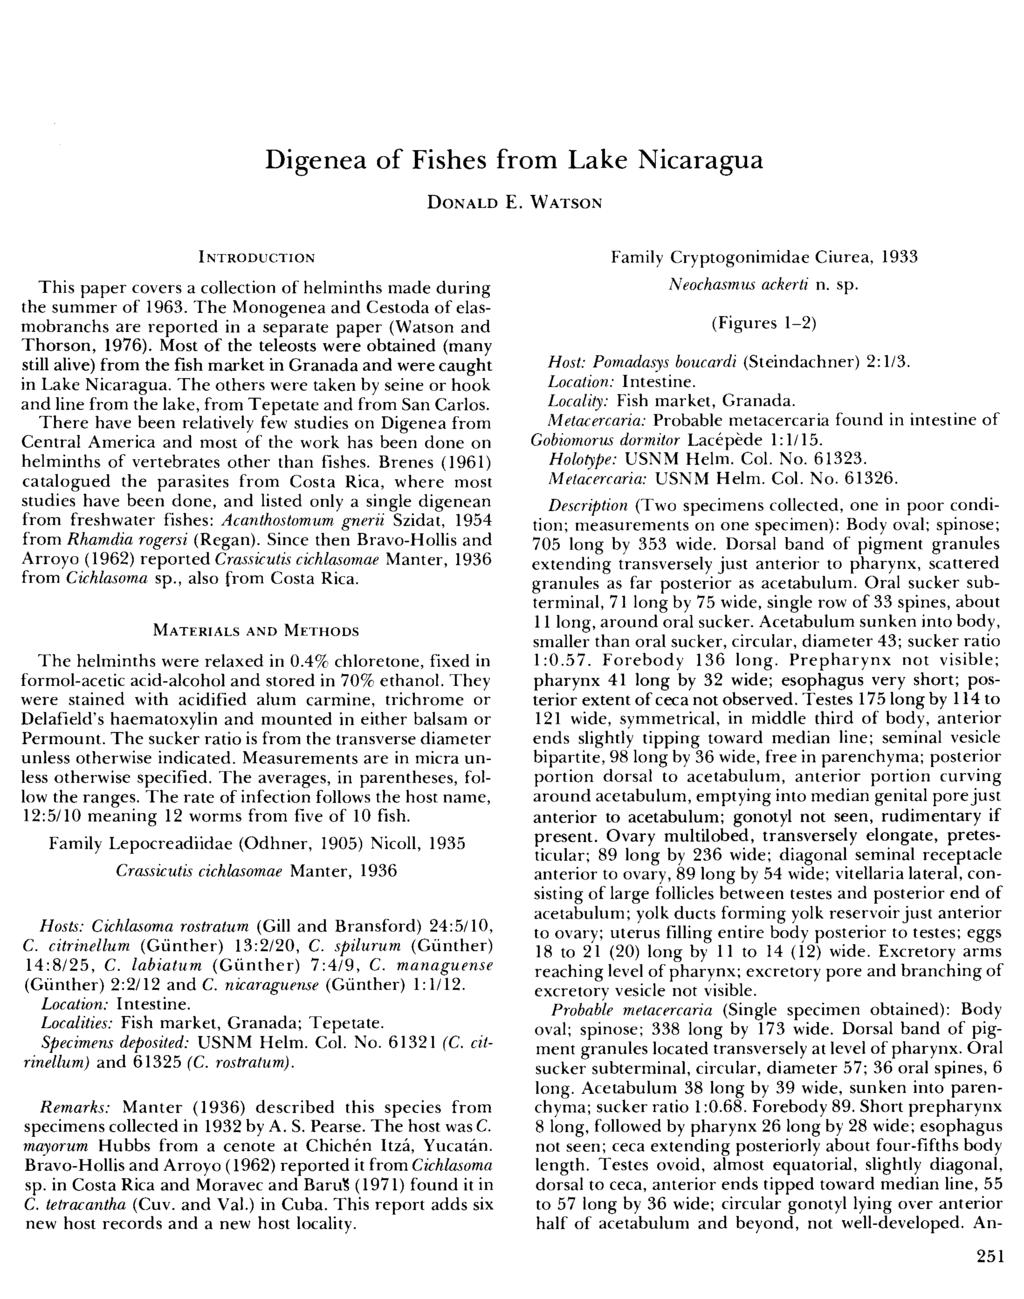 Published in INVESTIGATIONS OF THE ICHTHYOFAUNA OF NICARAGUAN LAKES, ed. Thomas B. Thorson (University of Nebraska-Lincoln, 1976).